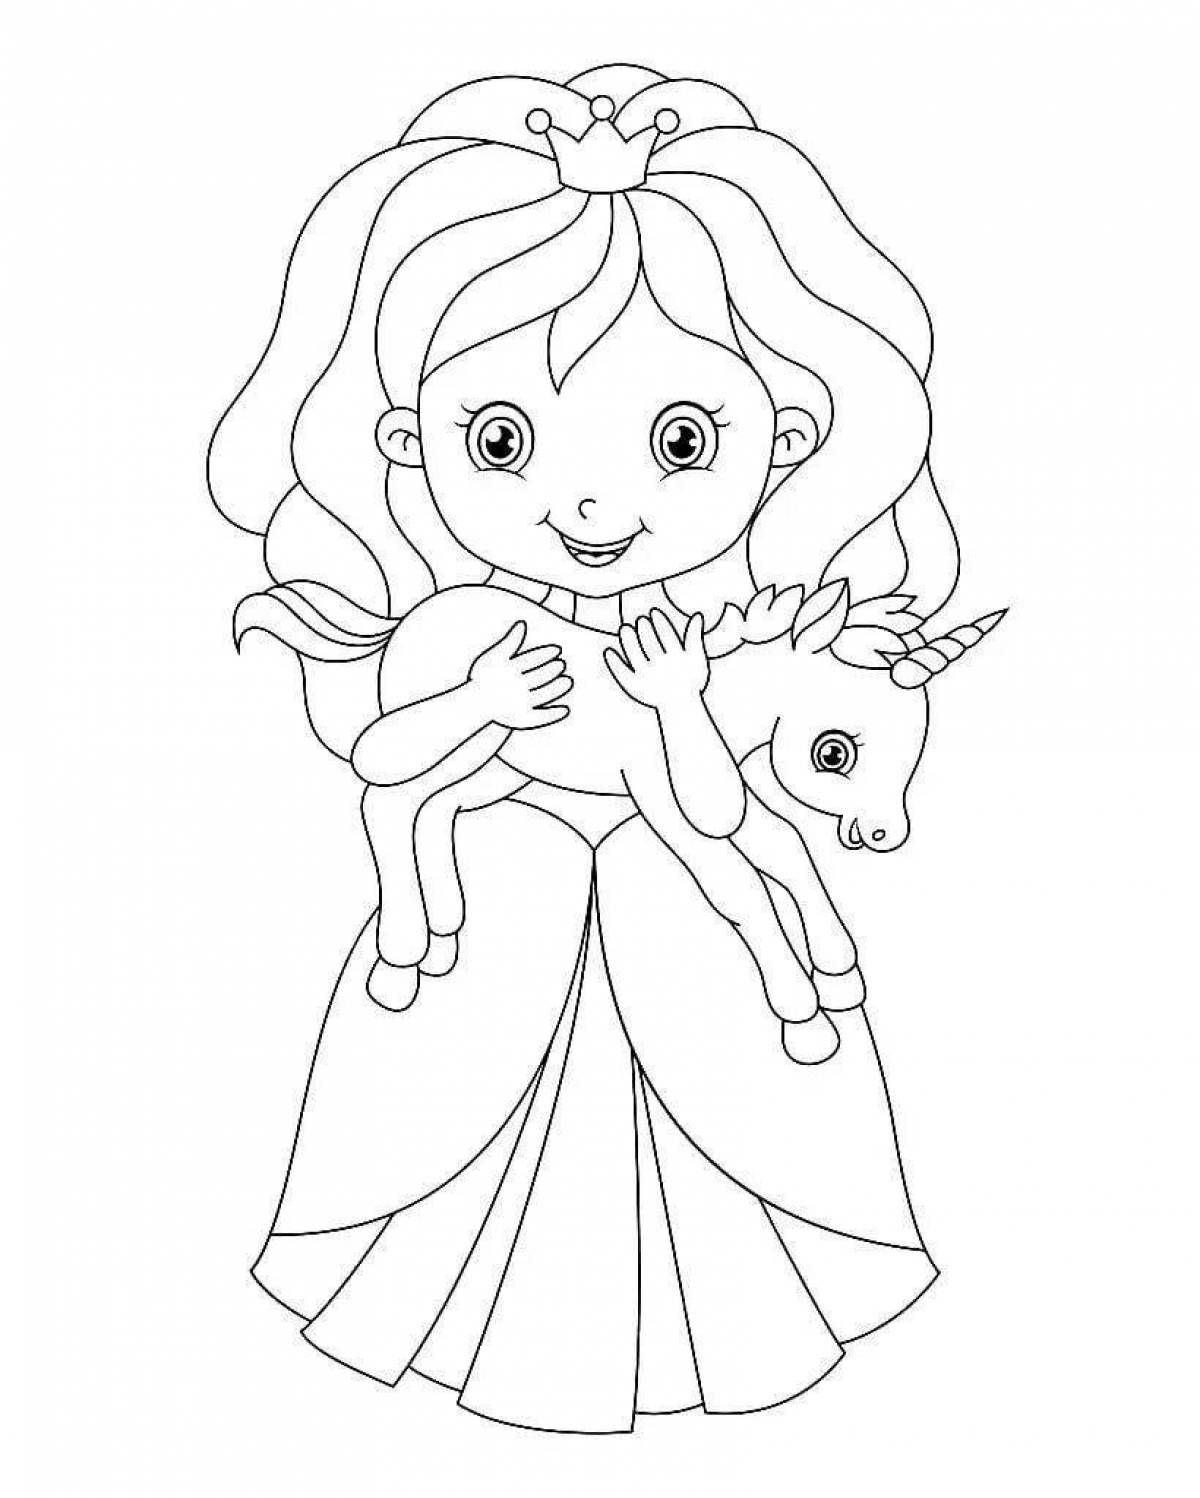 Delightful coloring for girls 3 years old, princess